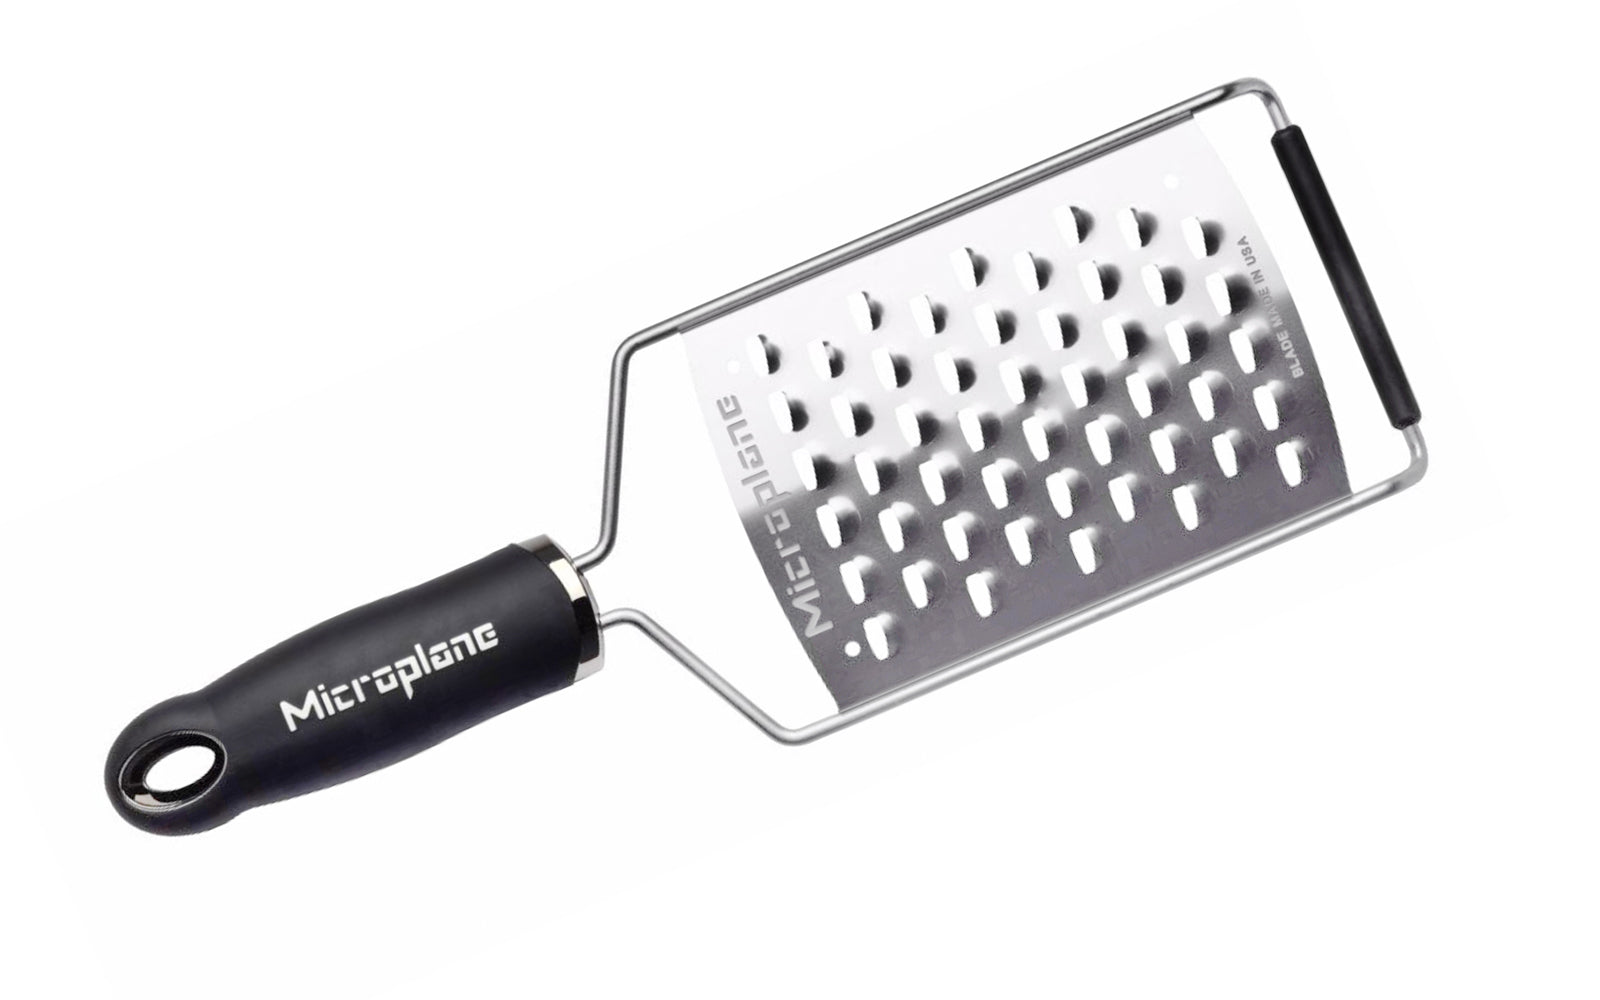 Cheese Grater for hard cheeses